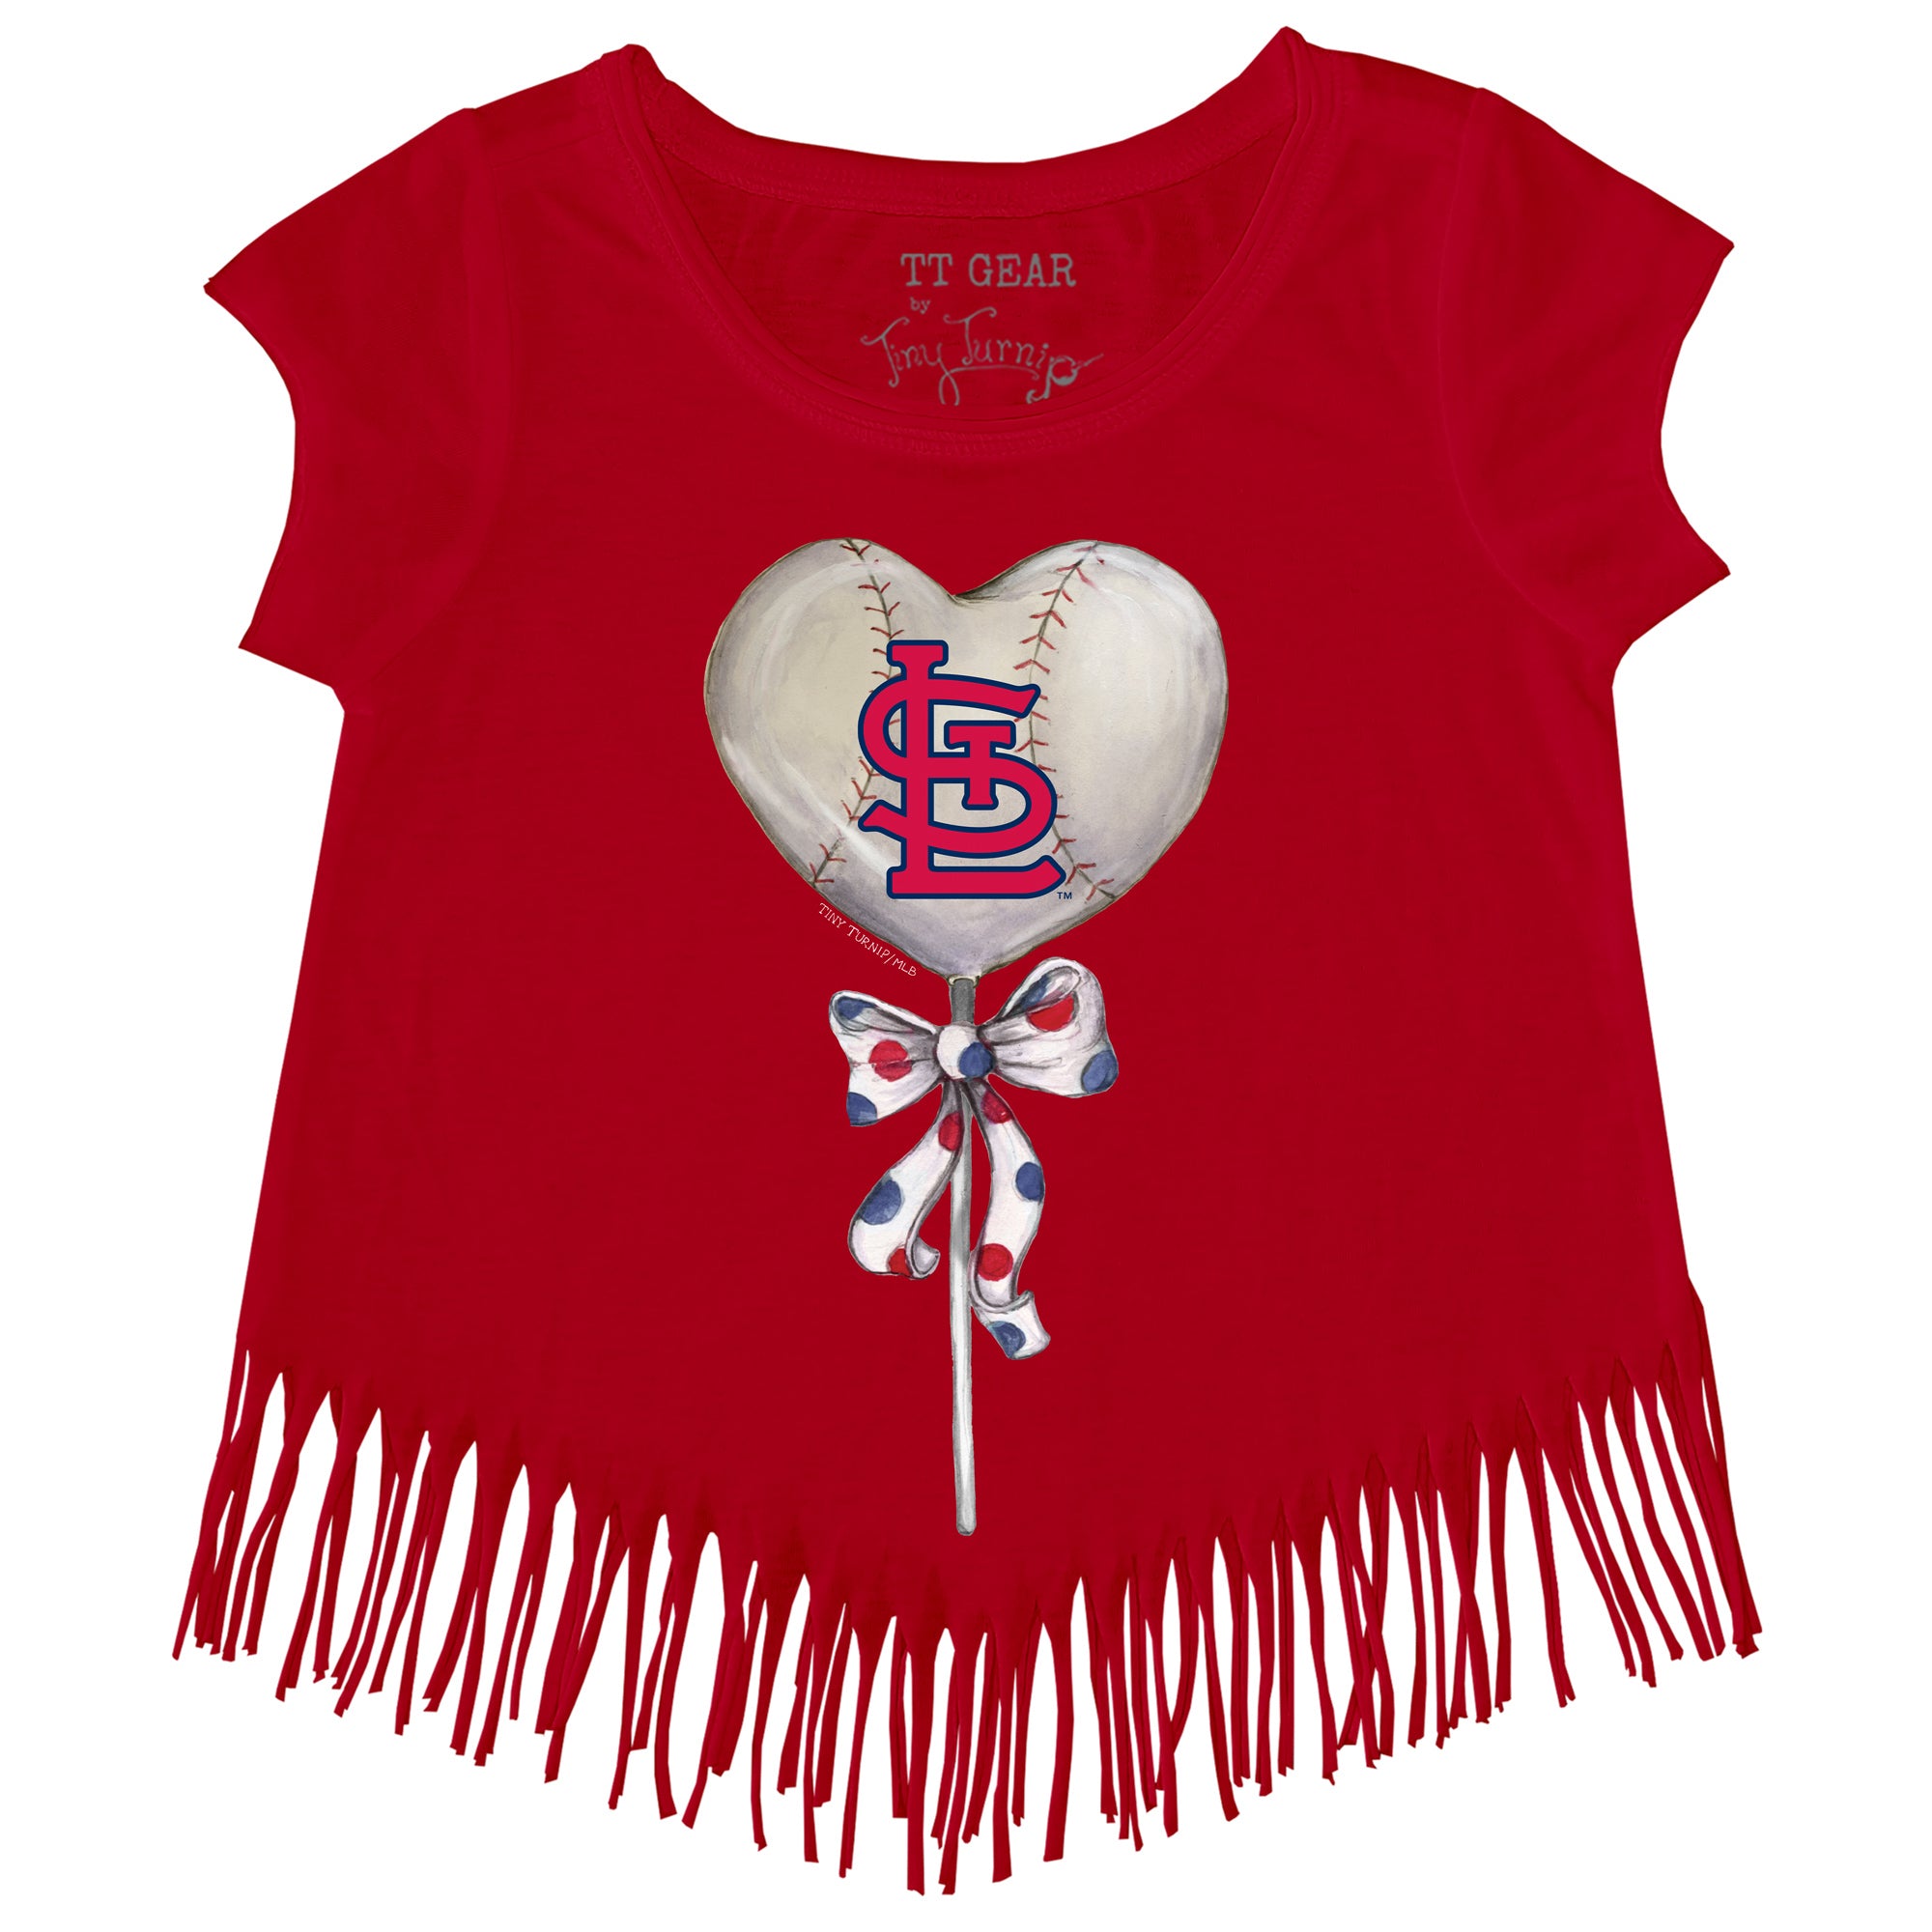 Youth Tiny Turnip White/Red St. Louis Cardinals Heart Lolly 3/4-Sleeve Raglan T-Shirt Size: Small